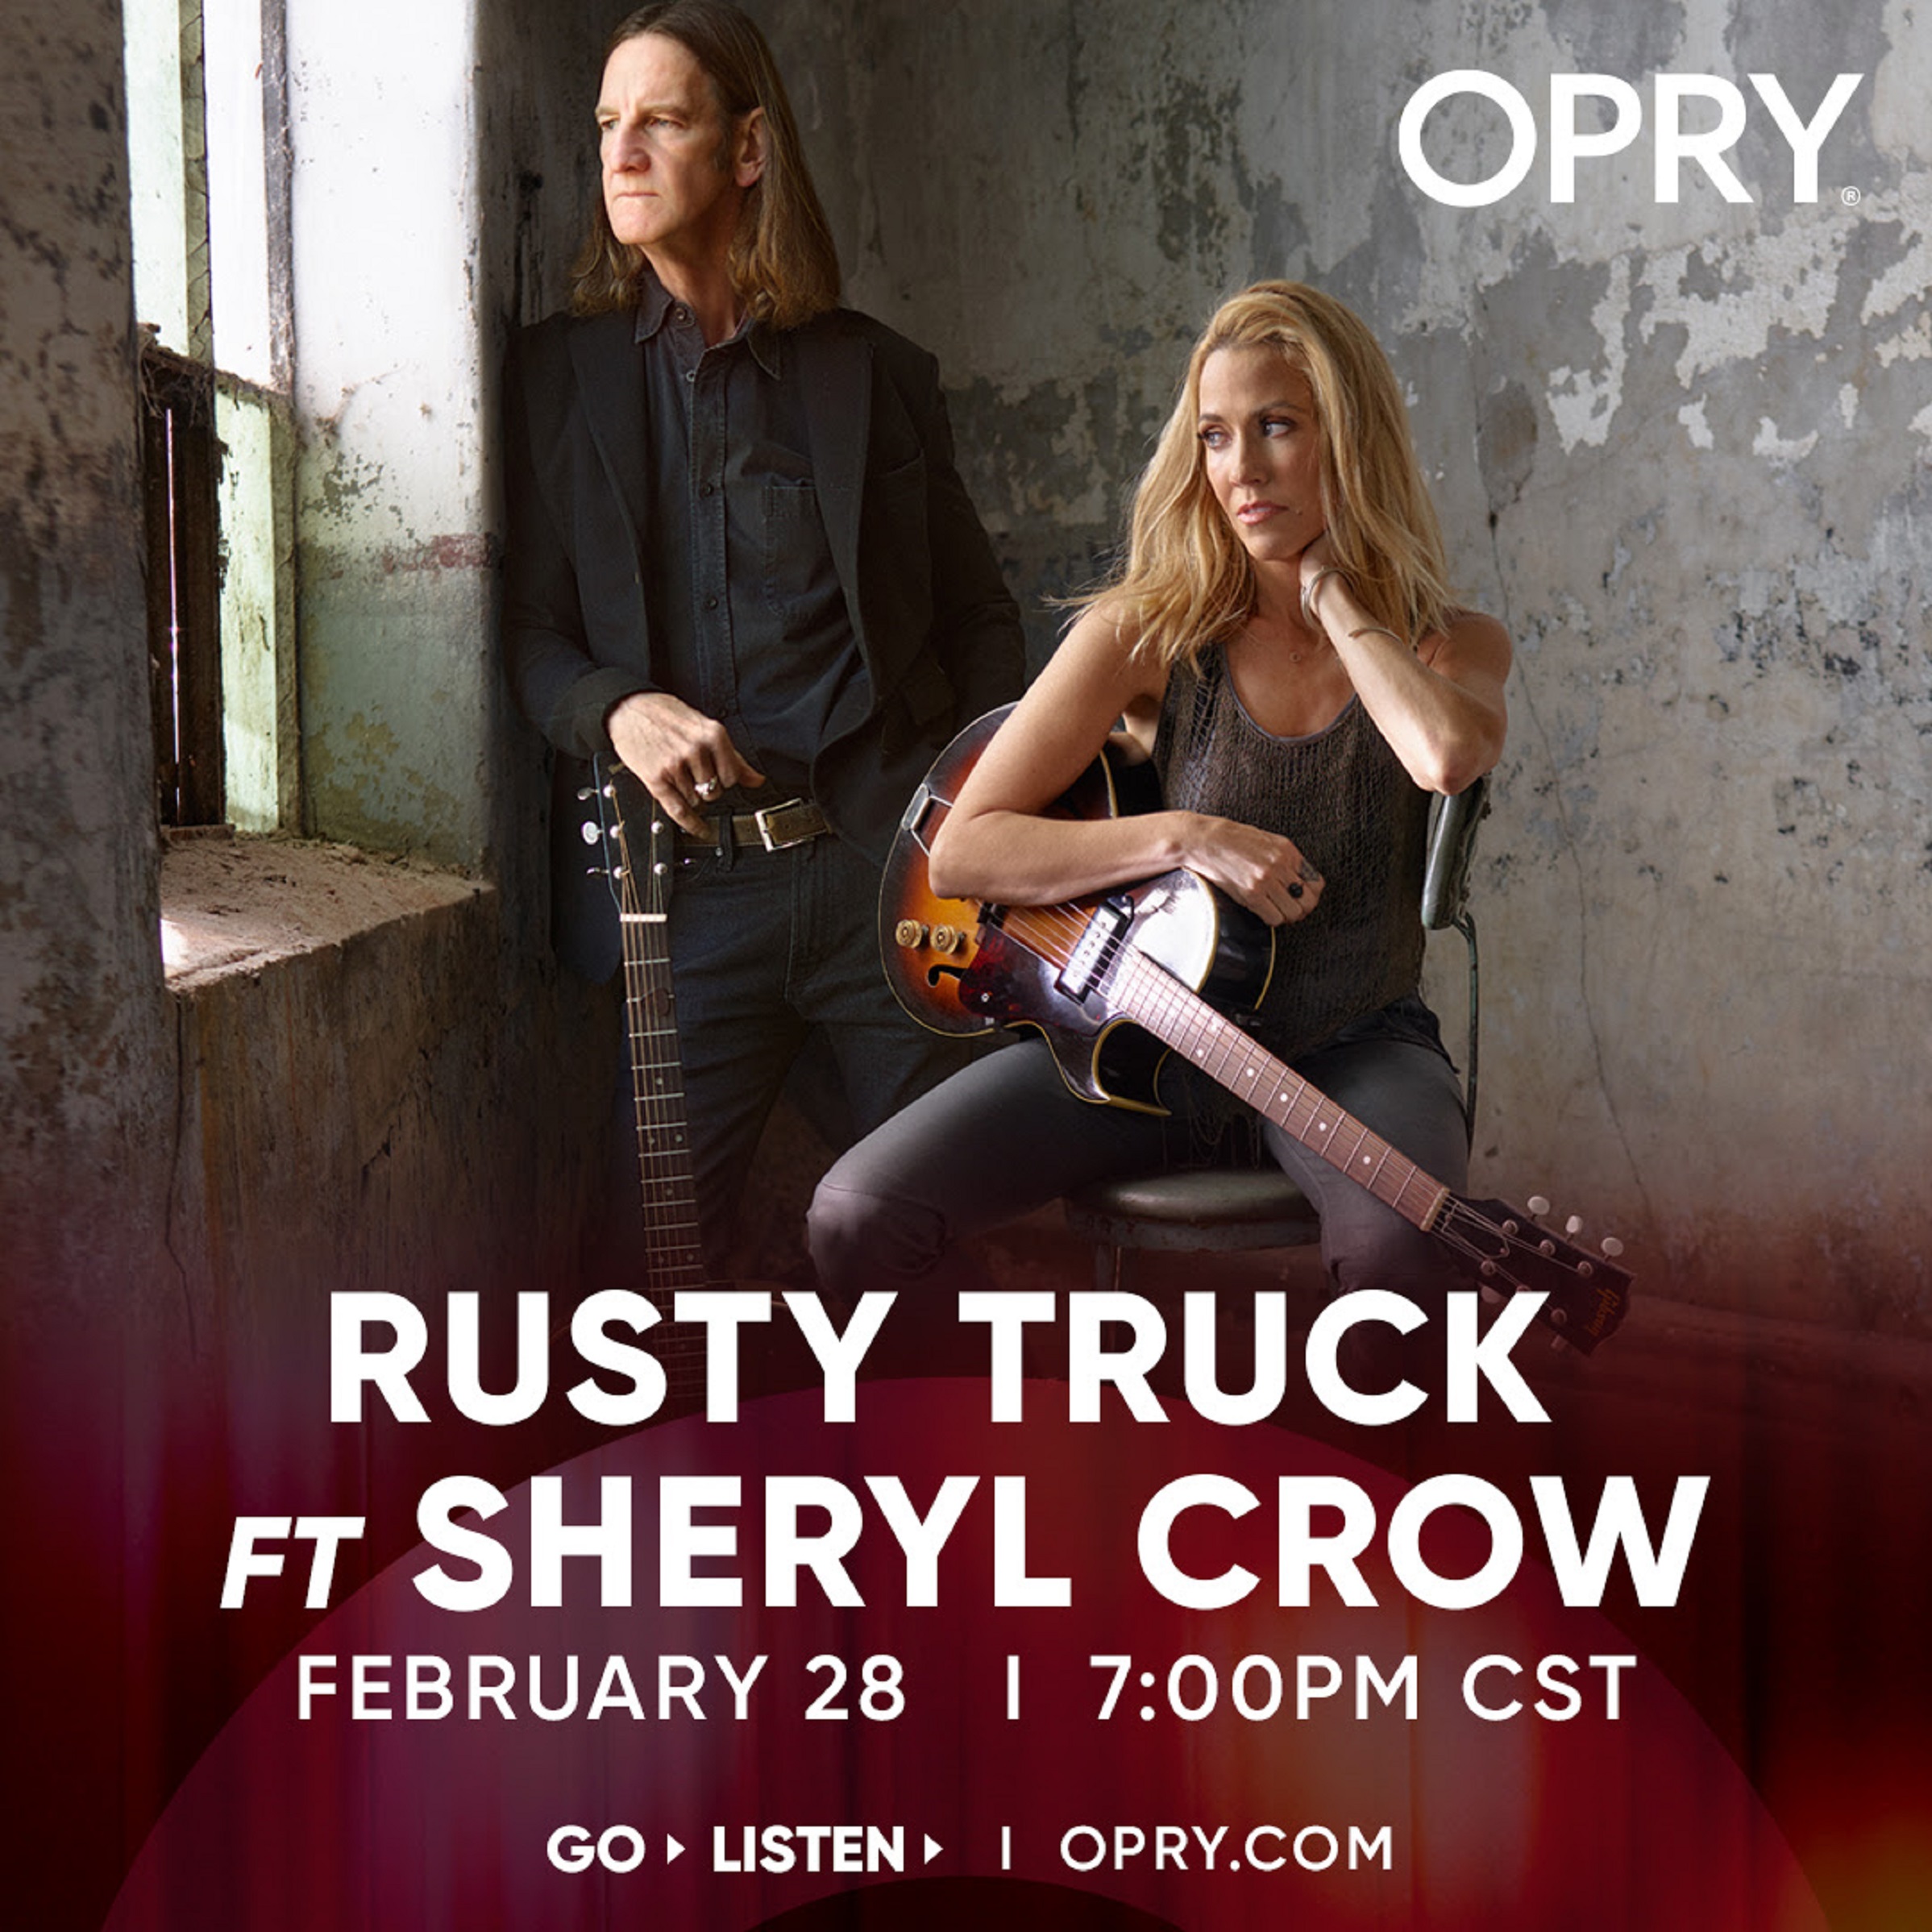 Sheryl Crow to perform with Rusty Truck at Grand Ole Opry on February 28